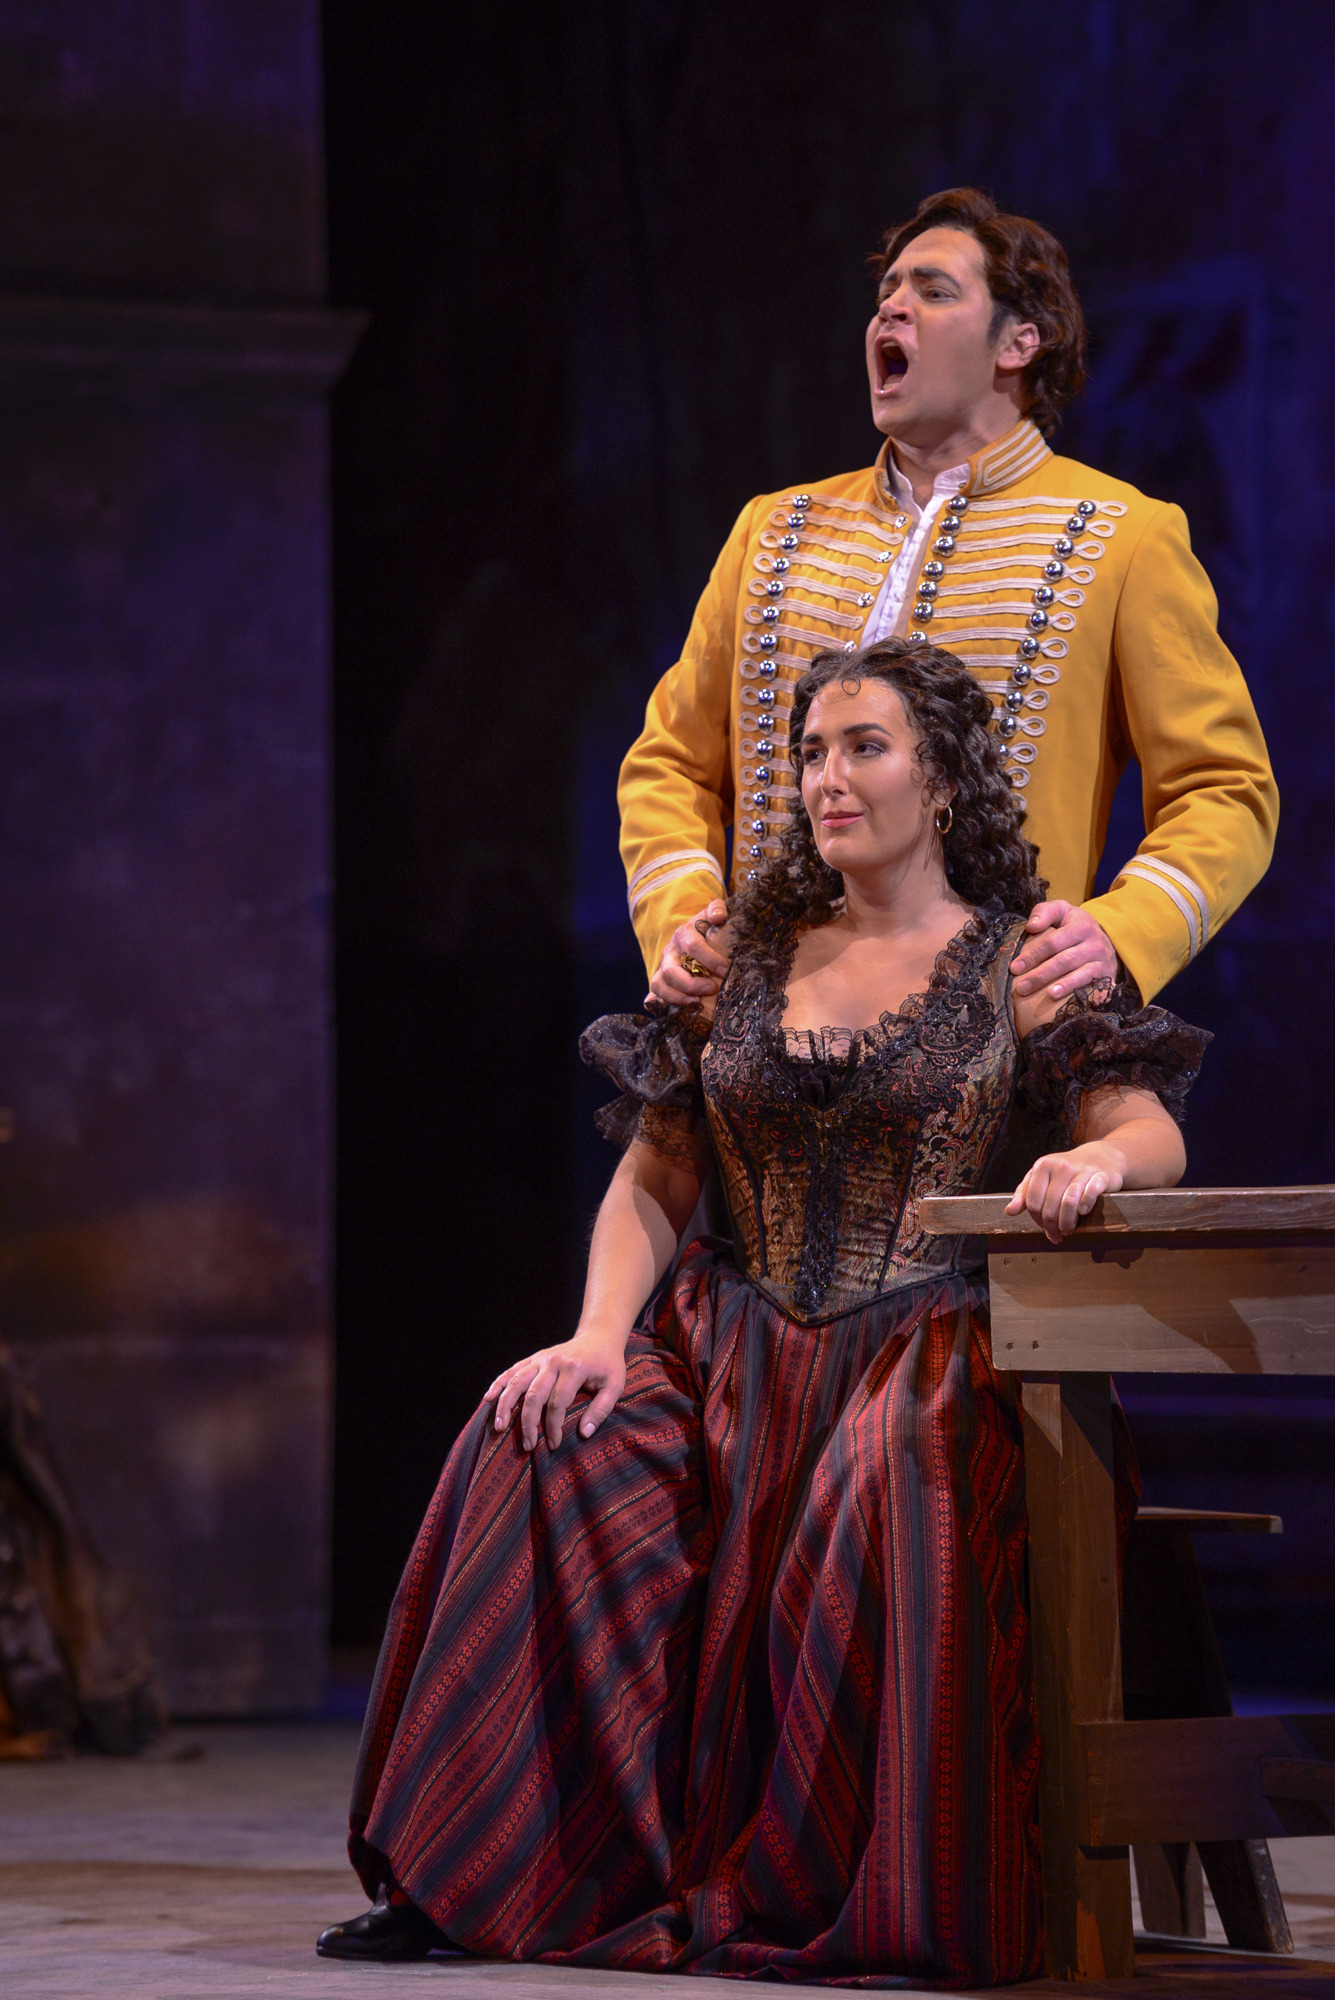 Tenor Cody Austin plays Don José and mezzo soprano Lisa Chavez plays the title role of Bizet’s Carmen at Sarasota Opera. Photo by Herb Booth